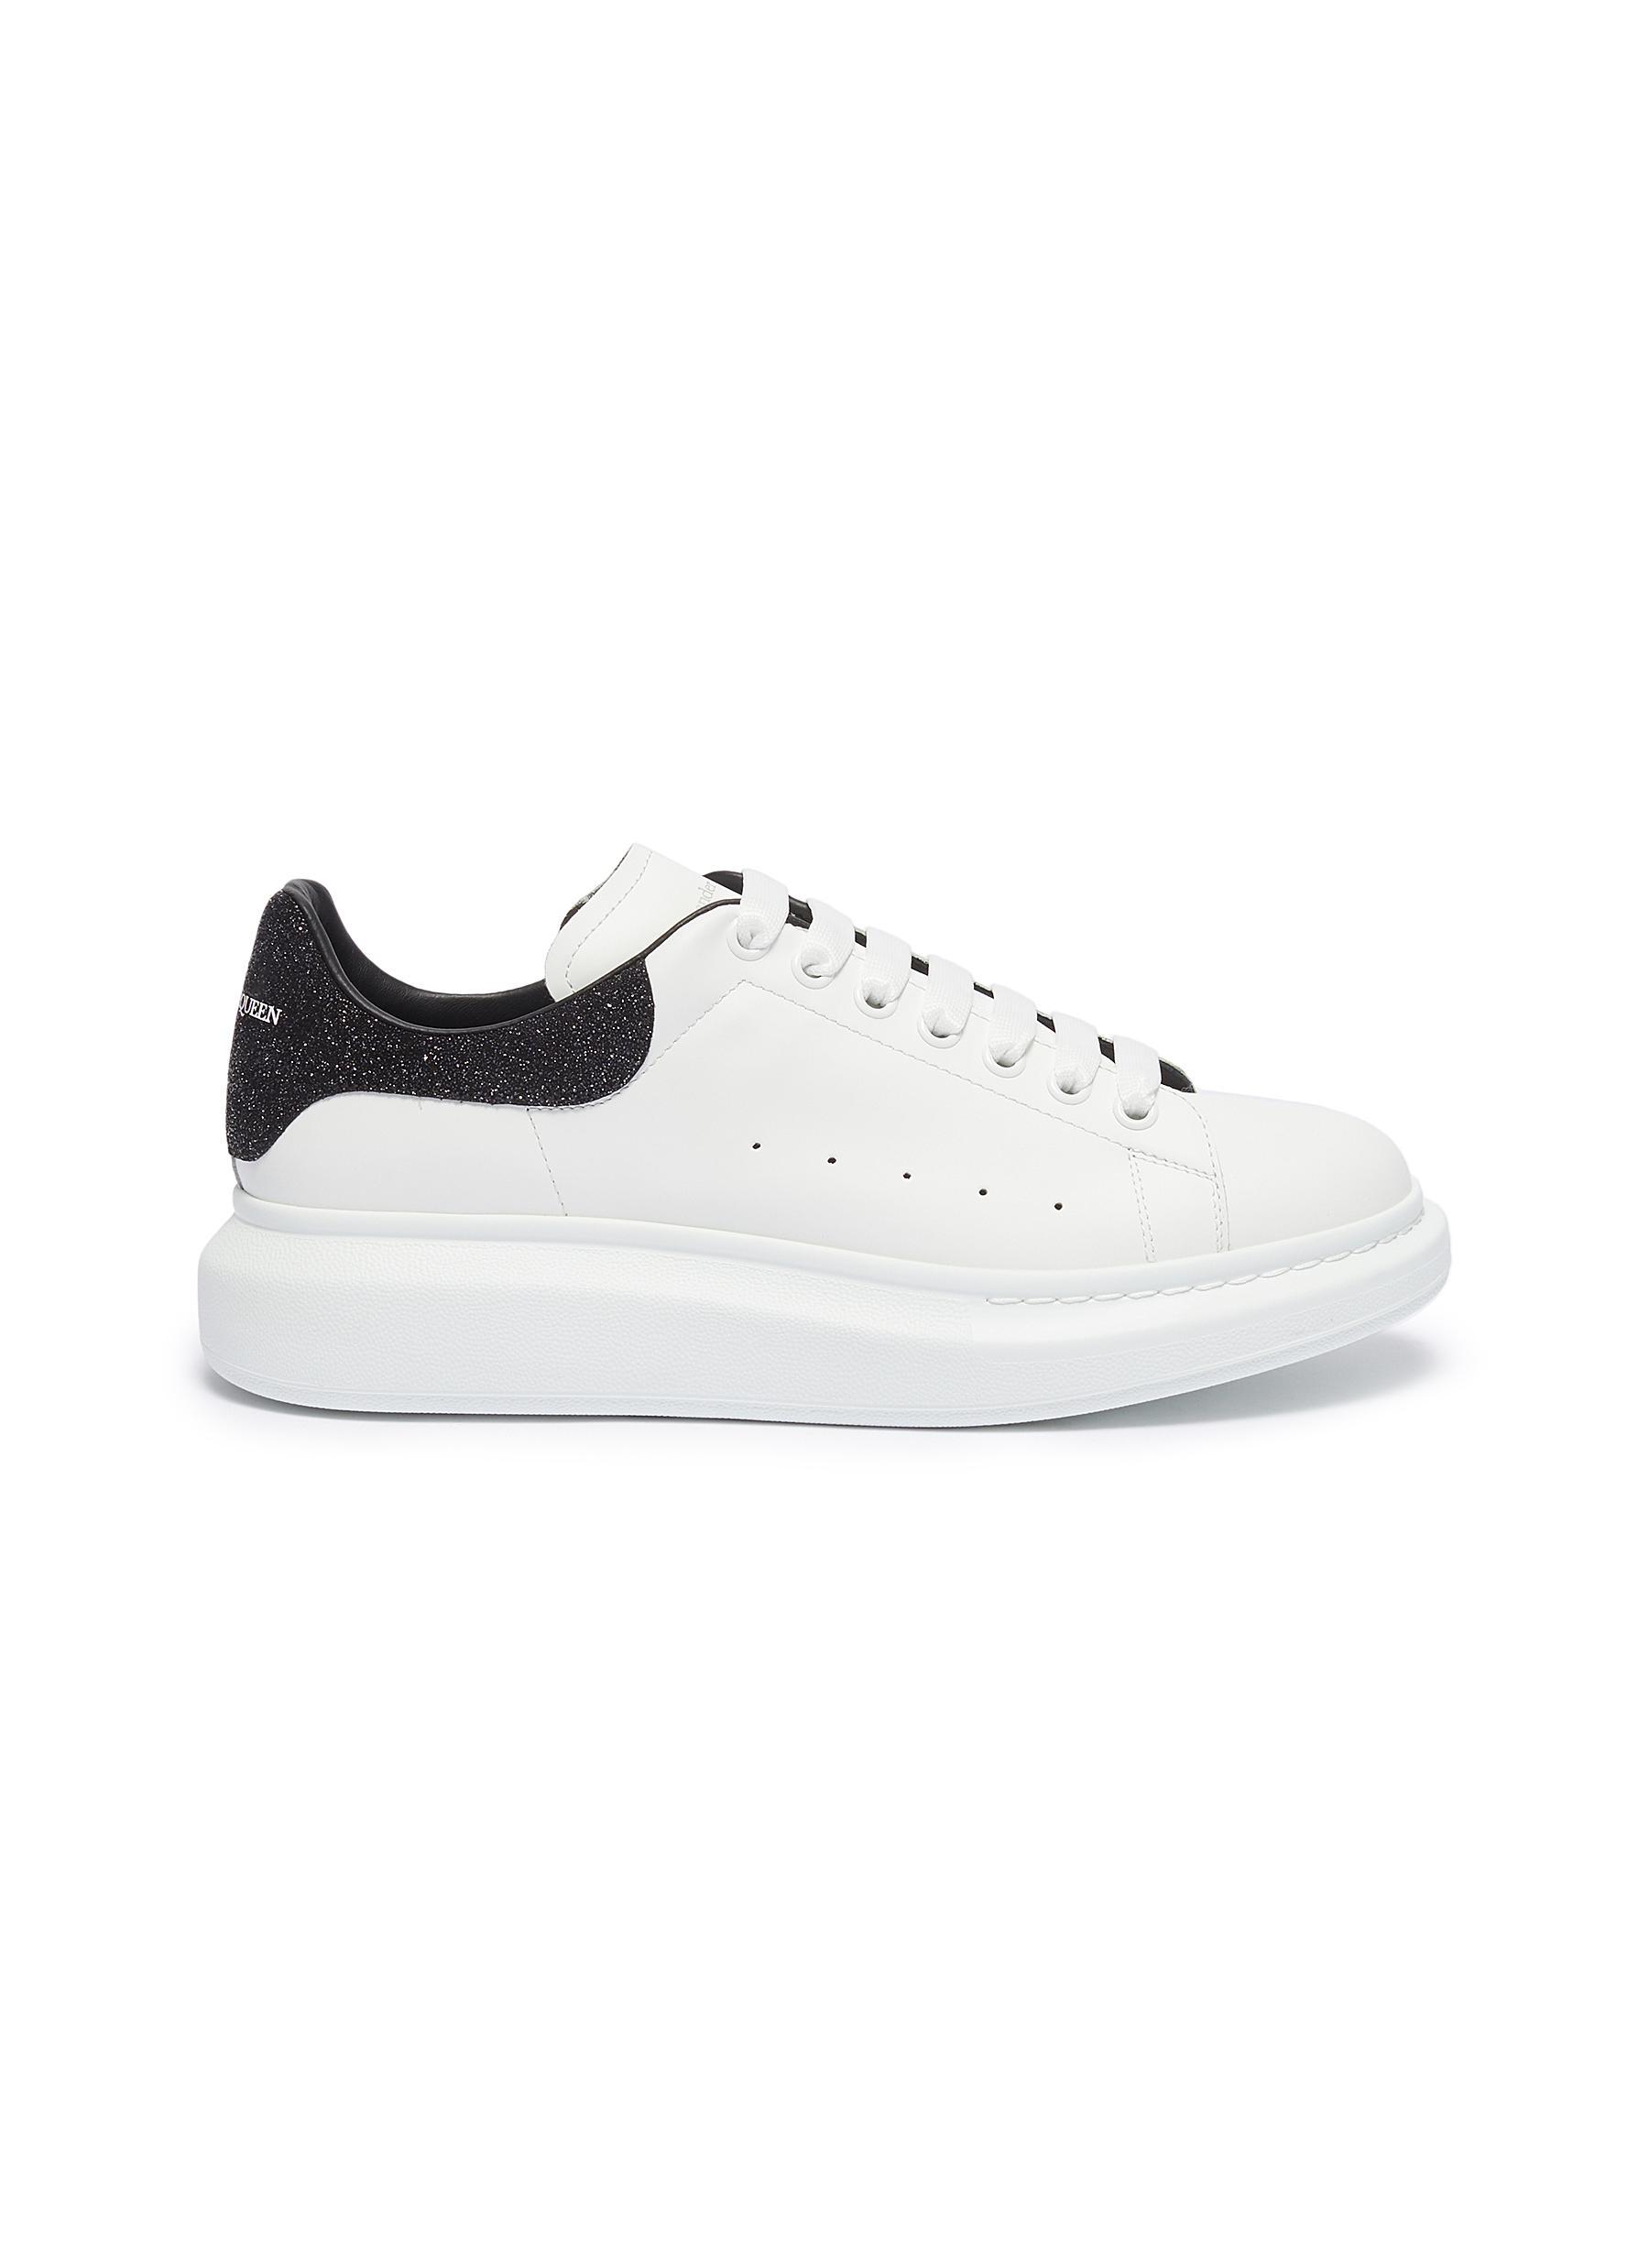 white and black alexander mcqueen's